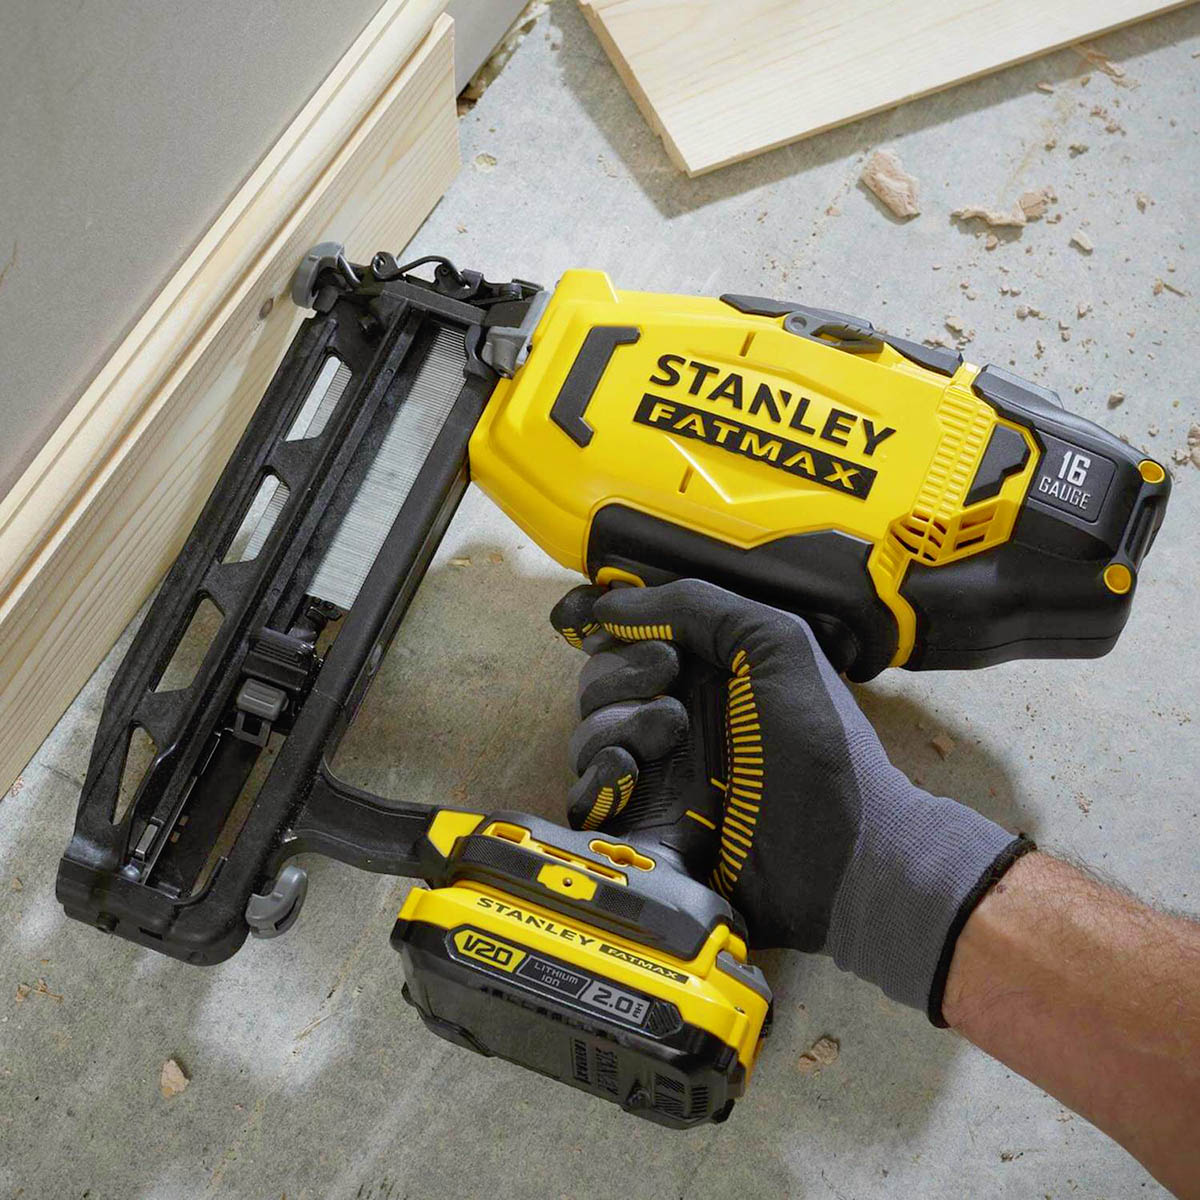 What Kind Of Nail Gun Do I Need For Decking